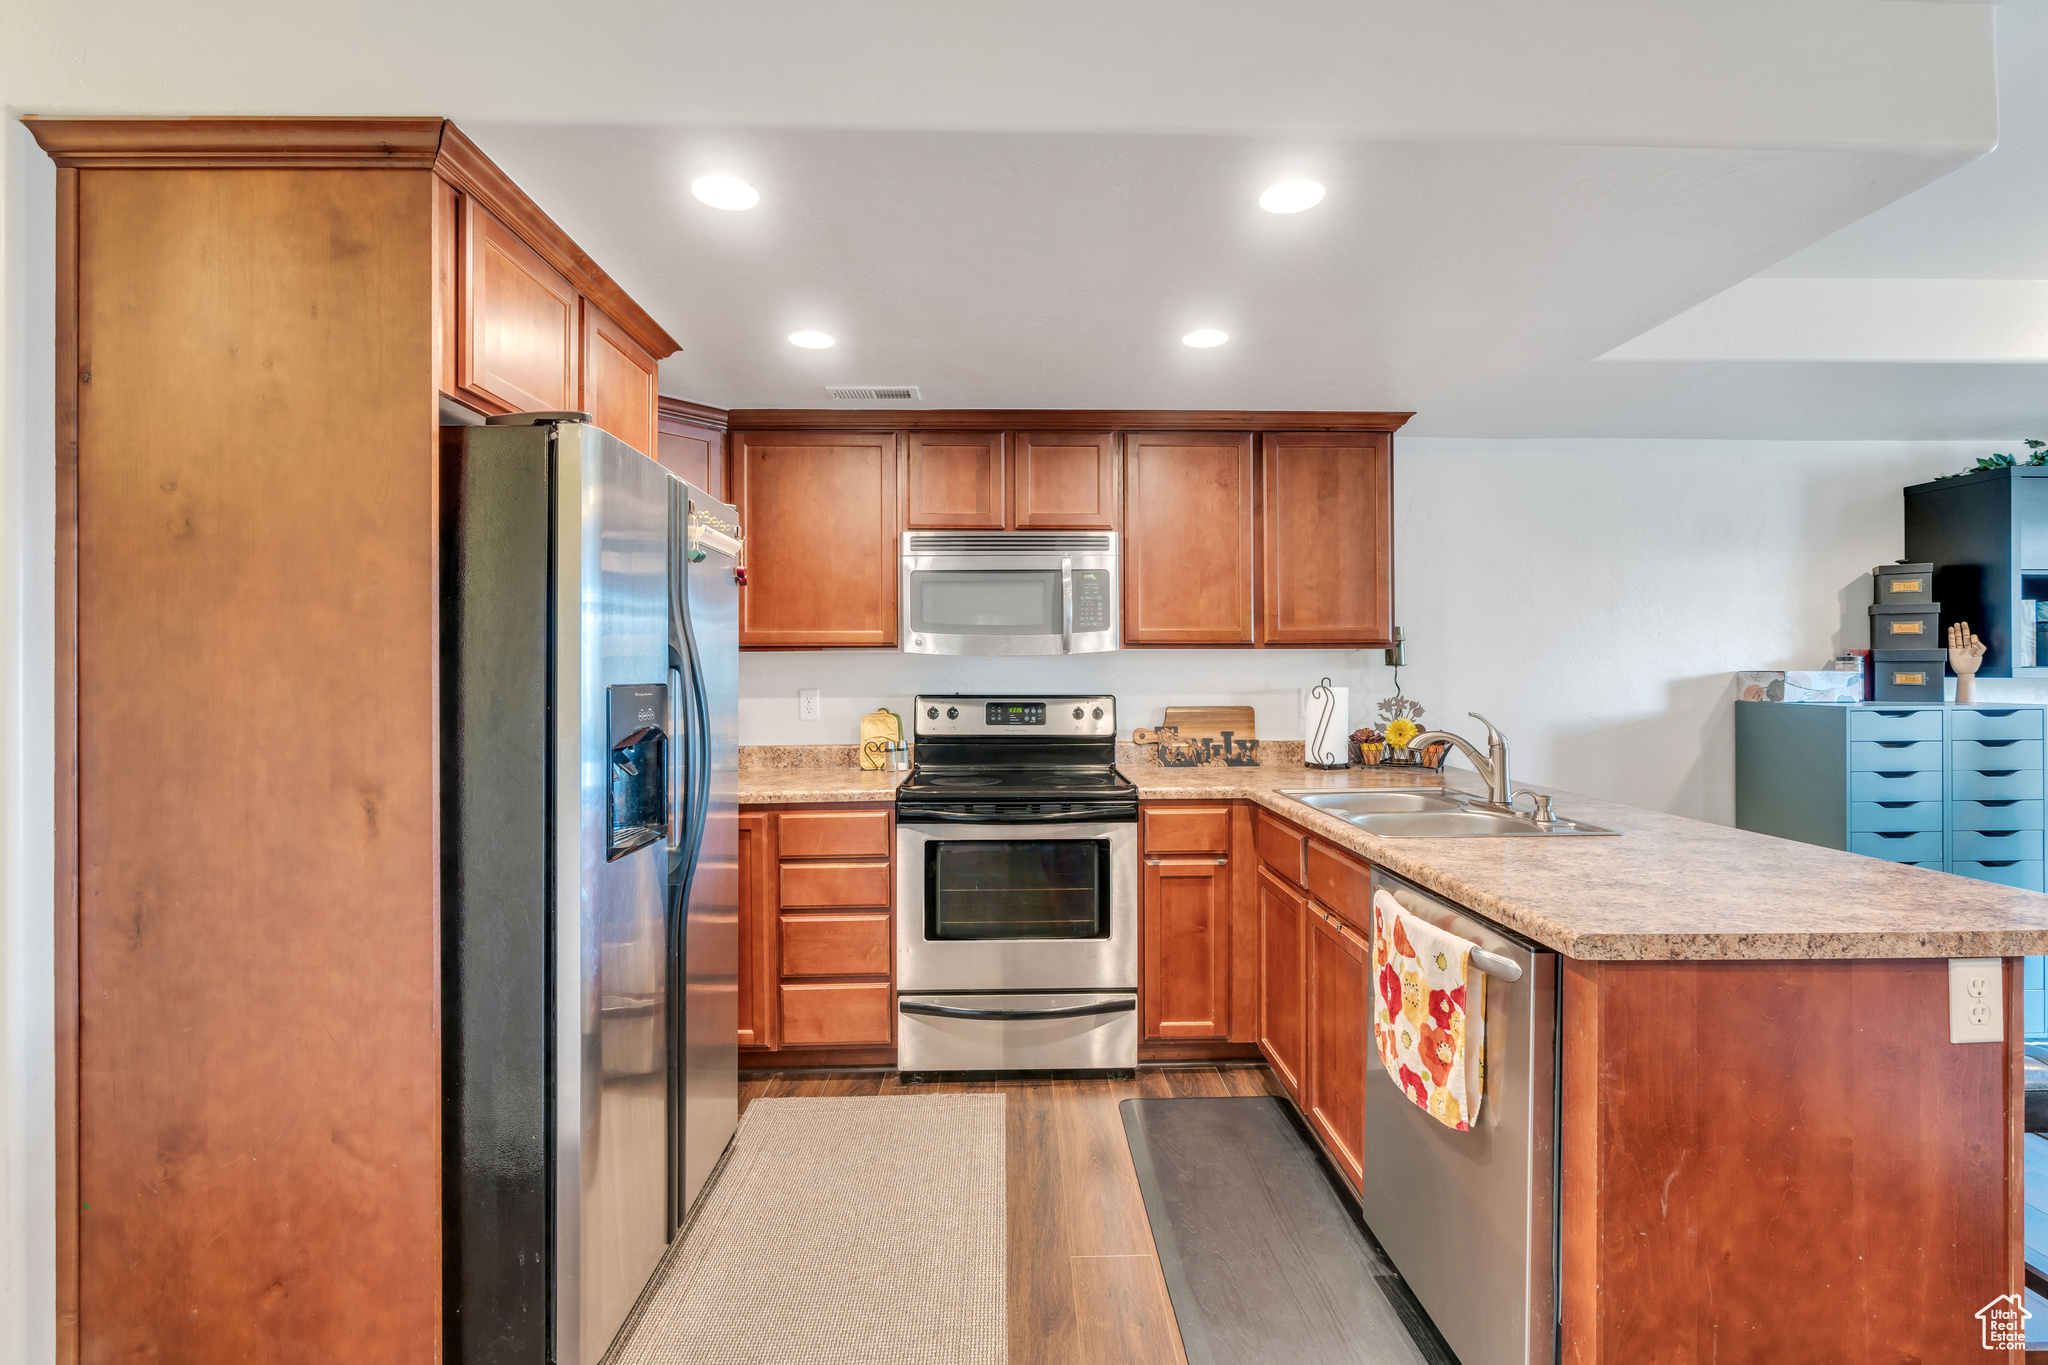 Kitchen featuring appliances with stainless steel finishes, sink, hardwood / wood-style floors, and kitchen peninsula